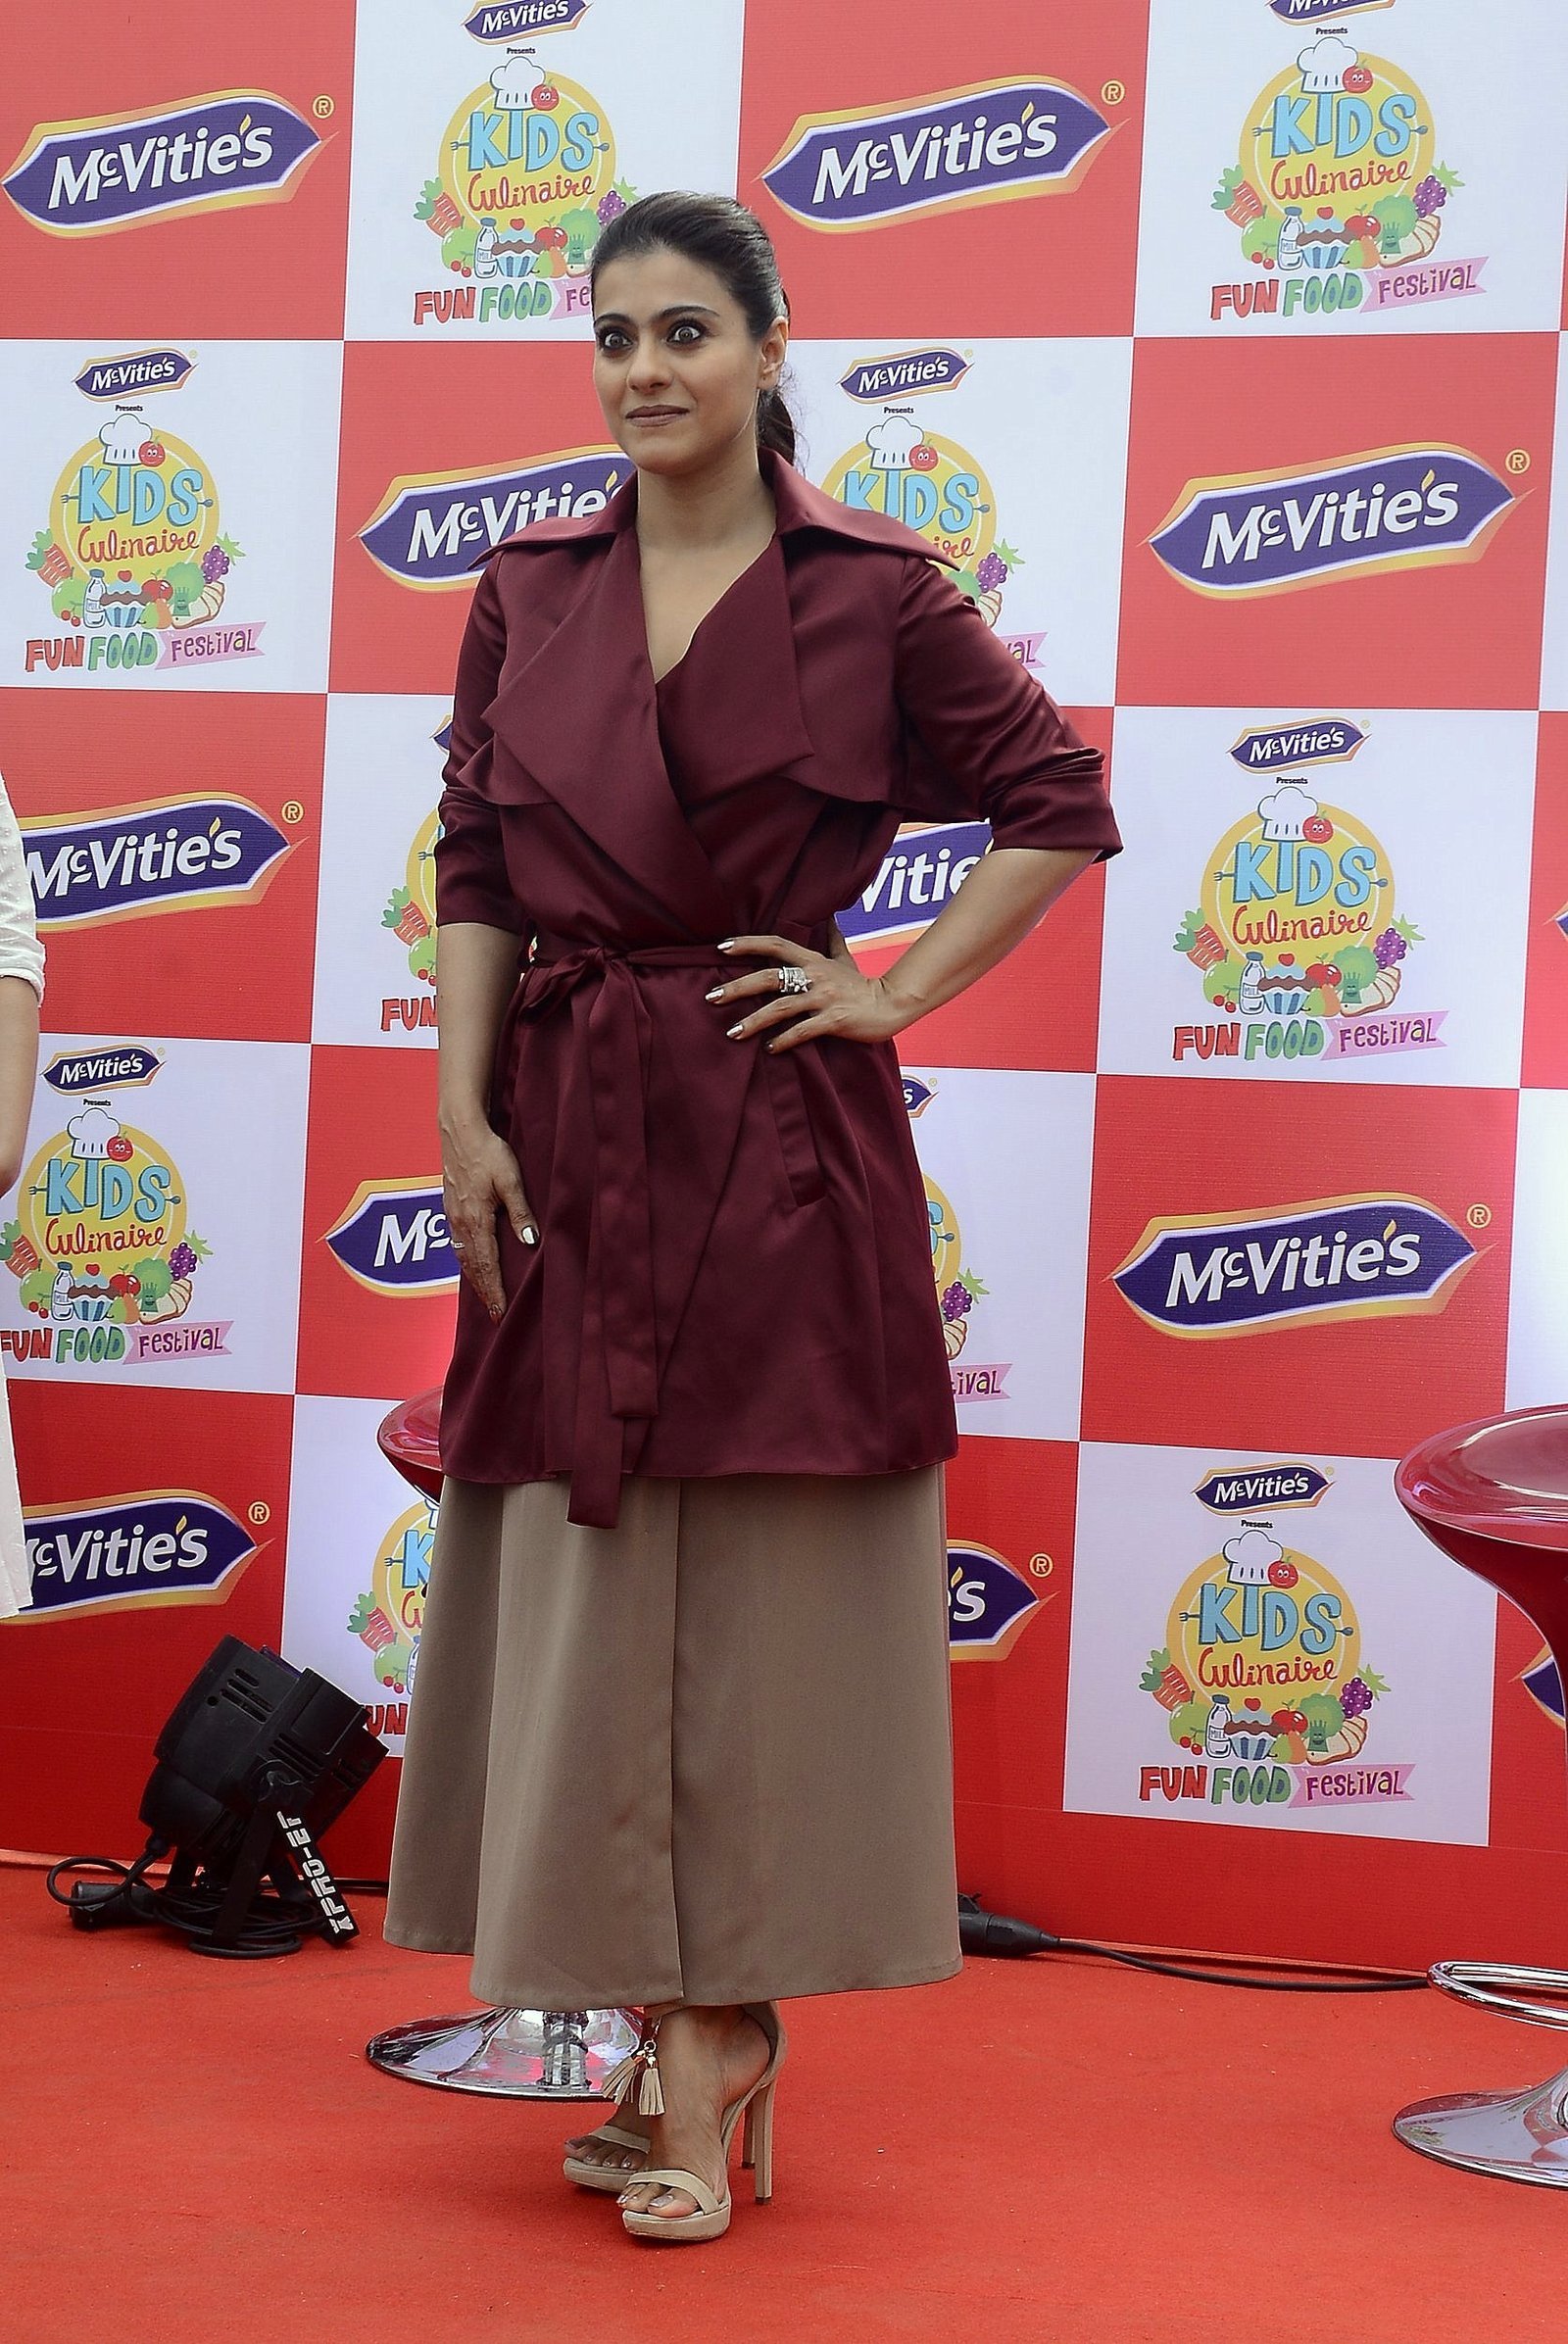 Kajol during the 4th edition of McVities Kids Culinarie Images | Picture 1491003